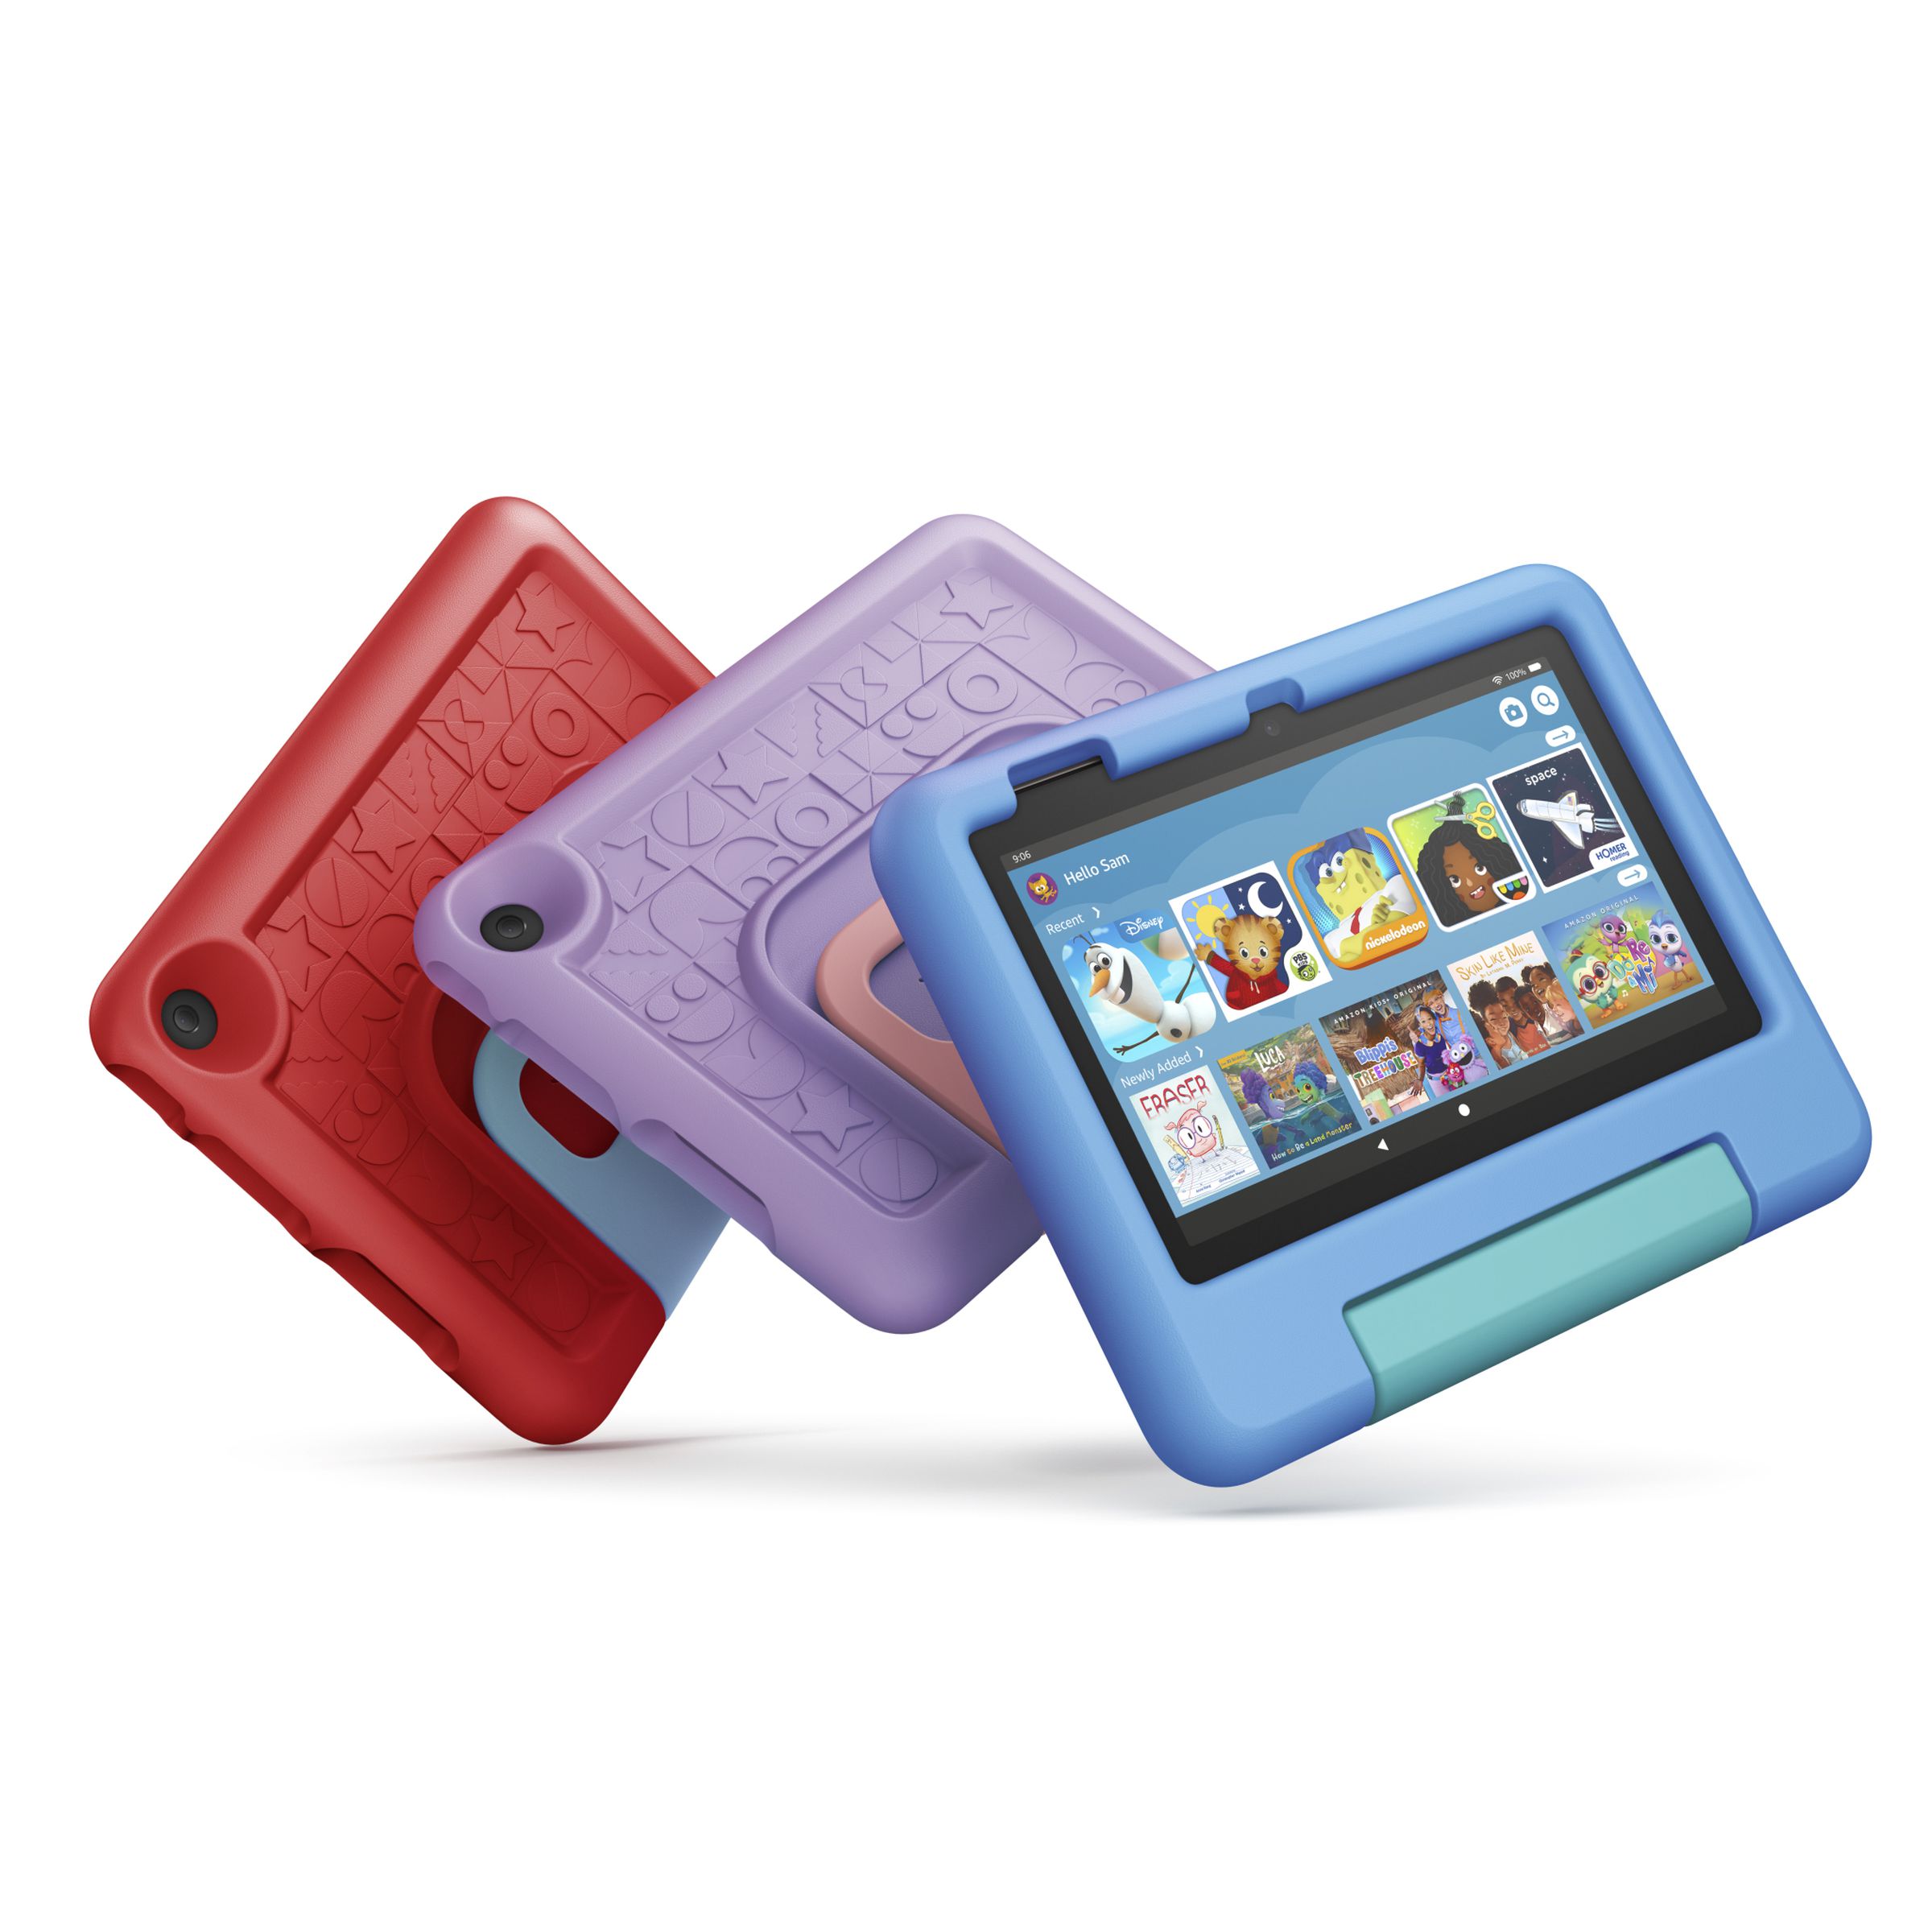 The Kids edition is the upgraded tablet but with armor.